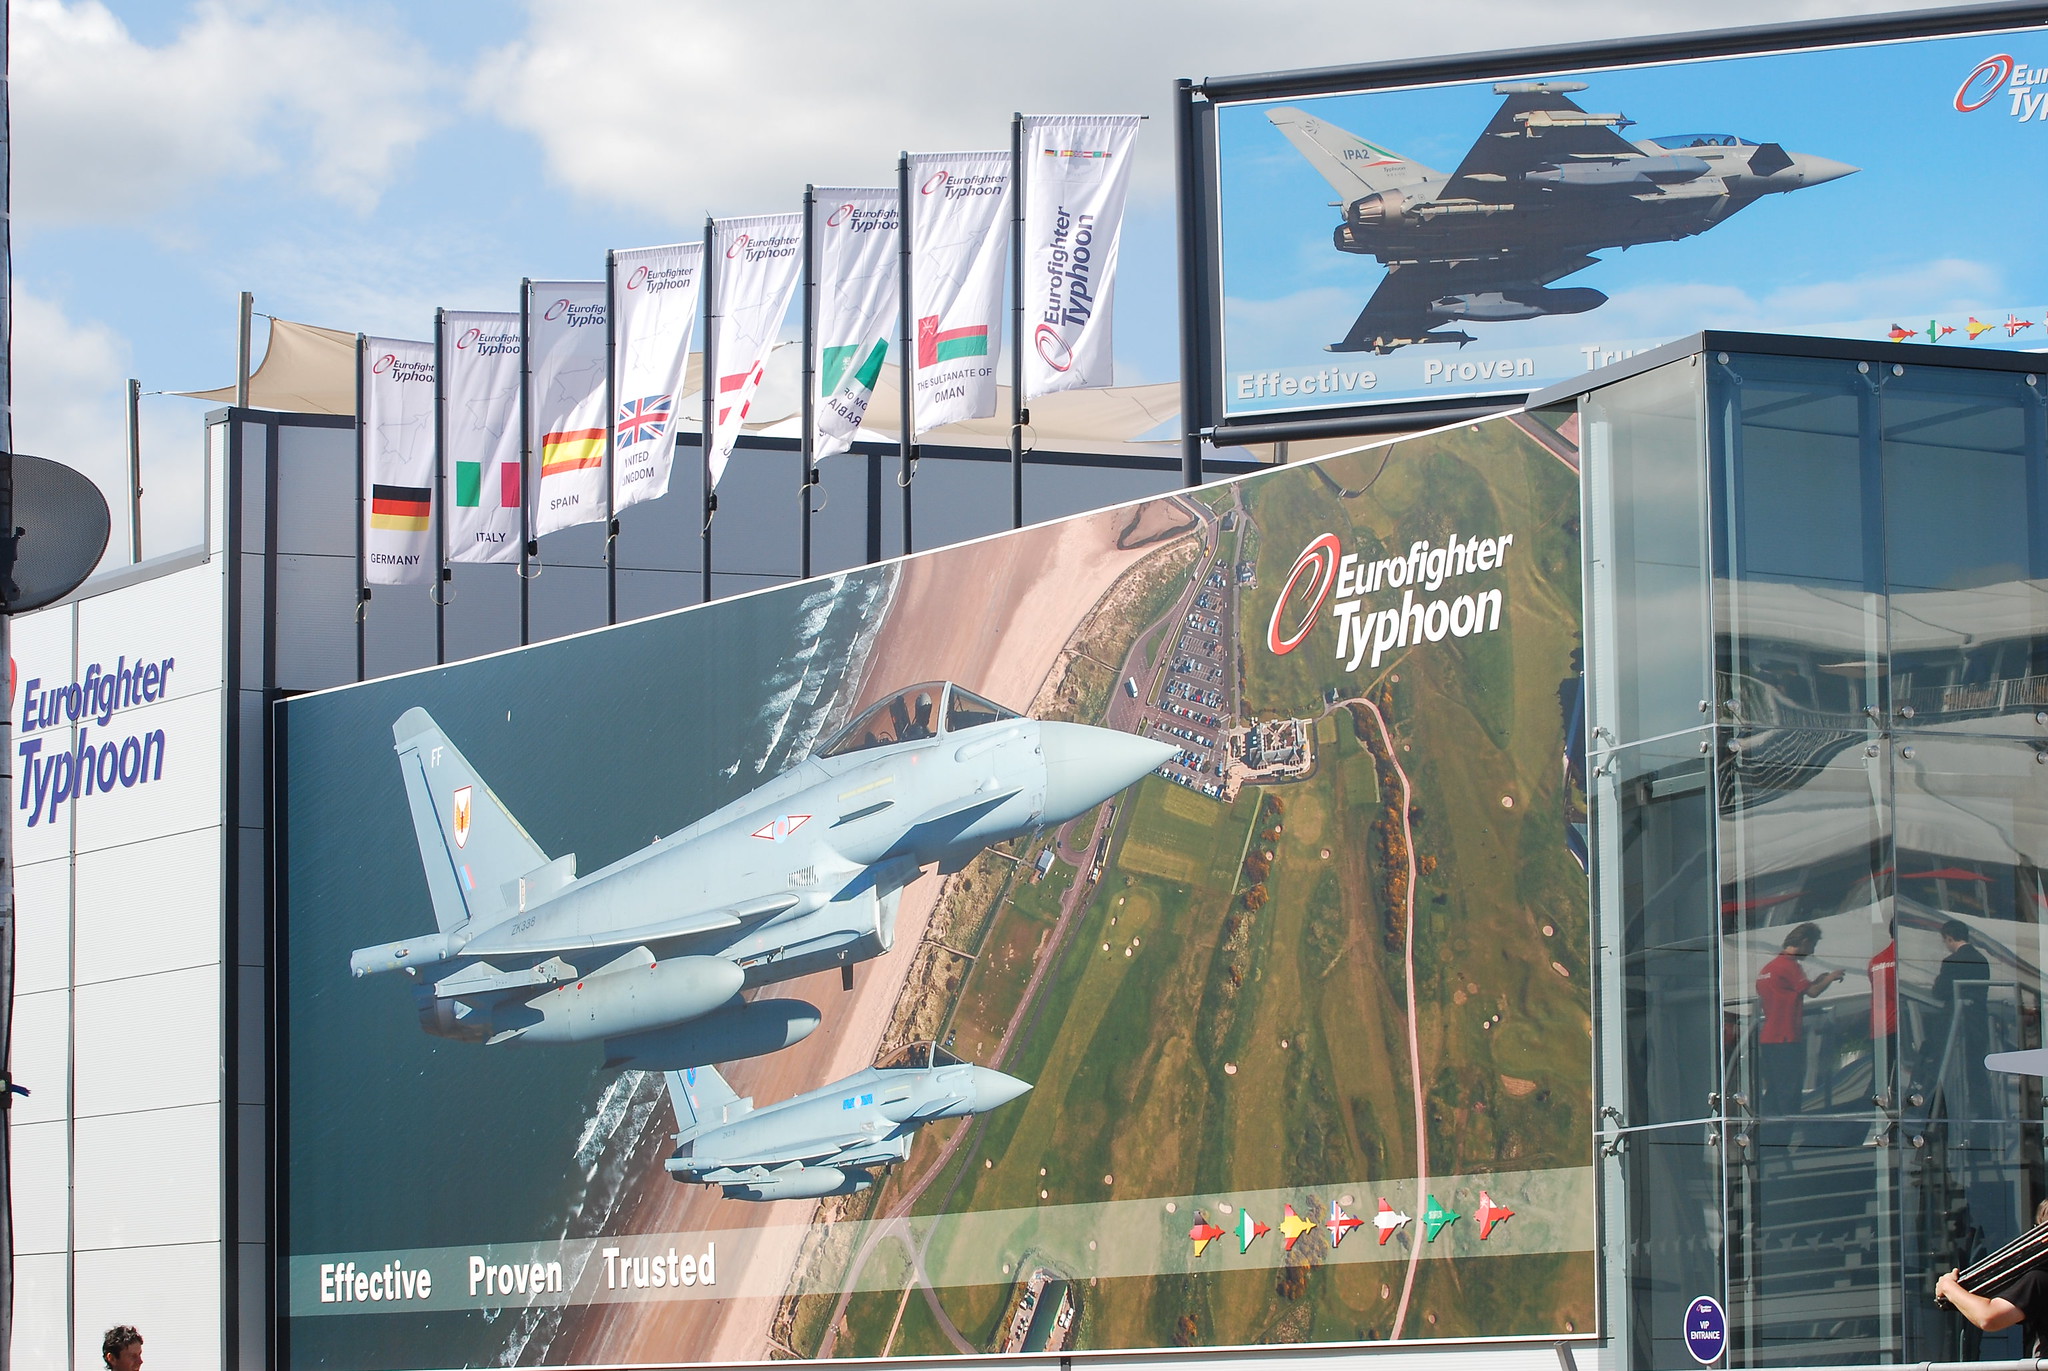 Eurofighter Typhoon large outdoor poster captioned Effective, proven, trusted. Flats behind include German, Spain, Italy UK